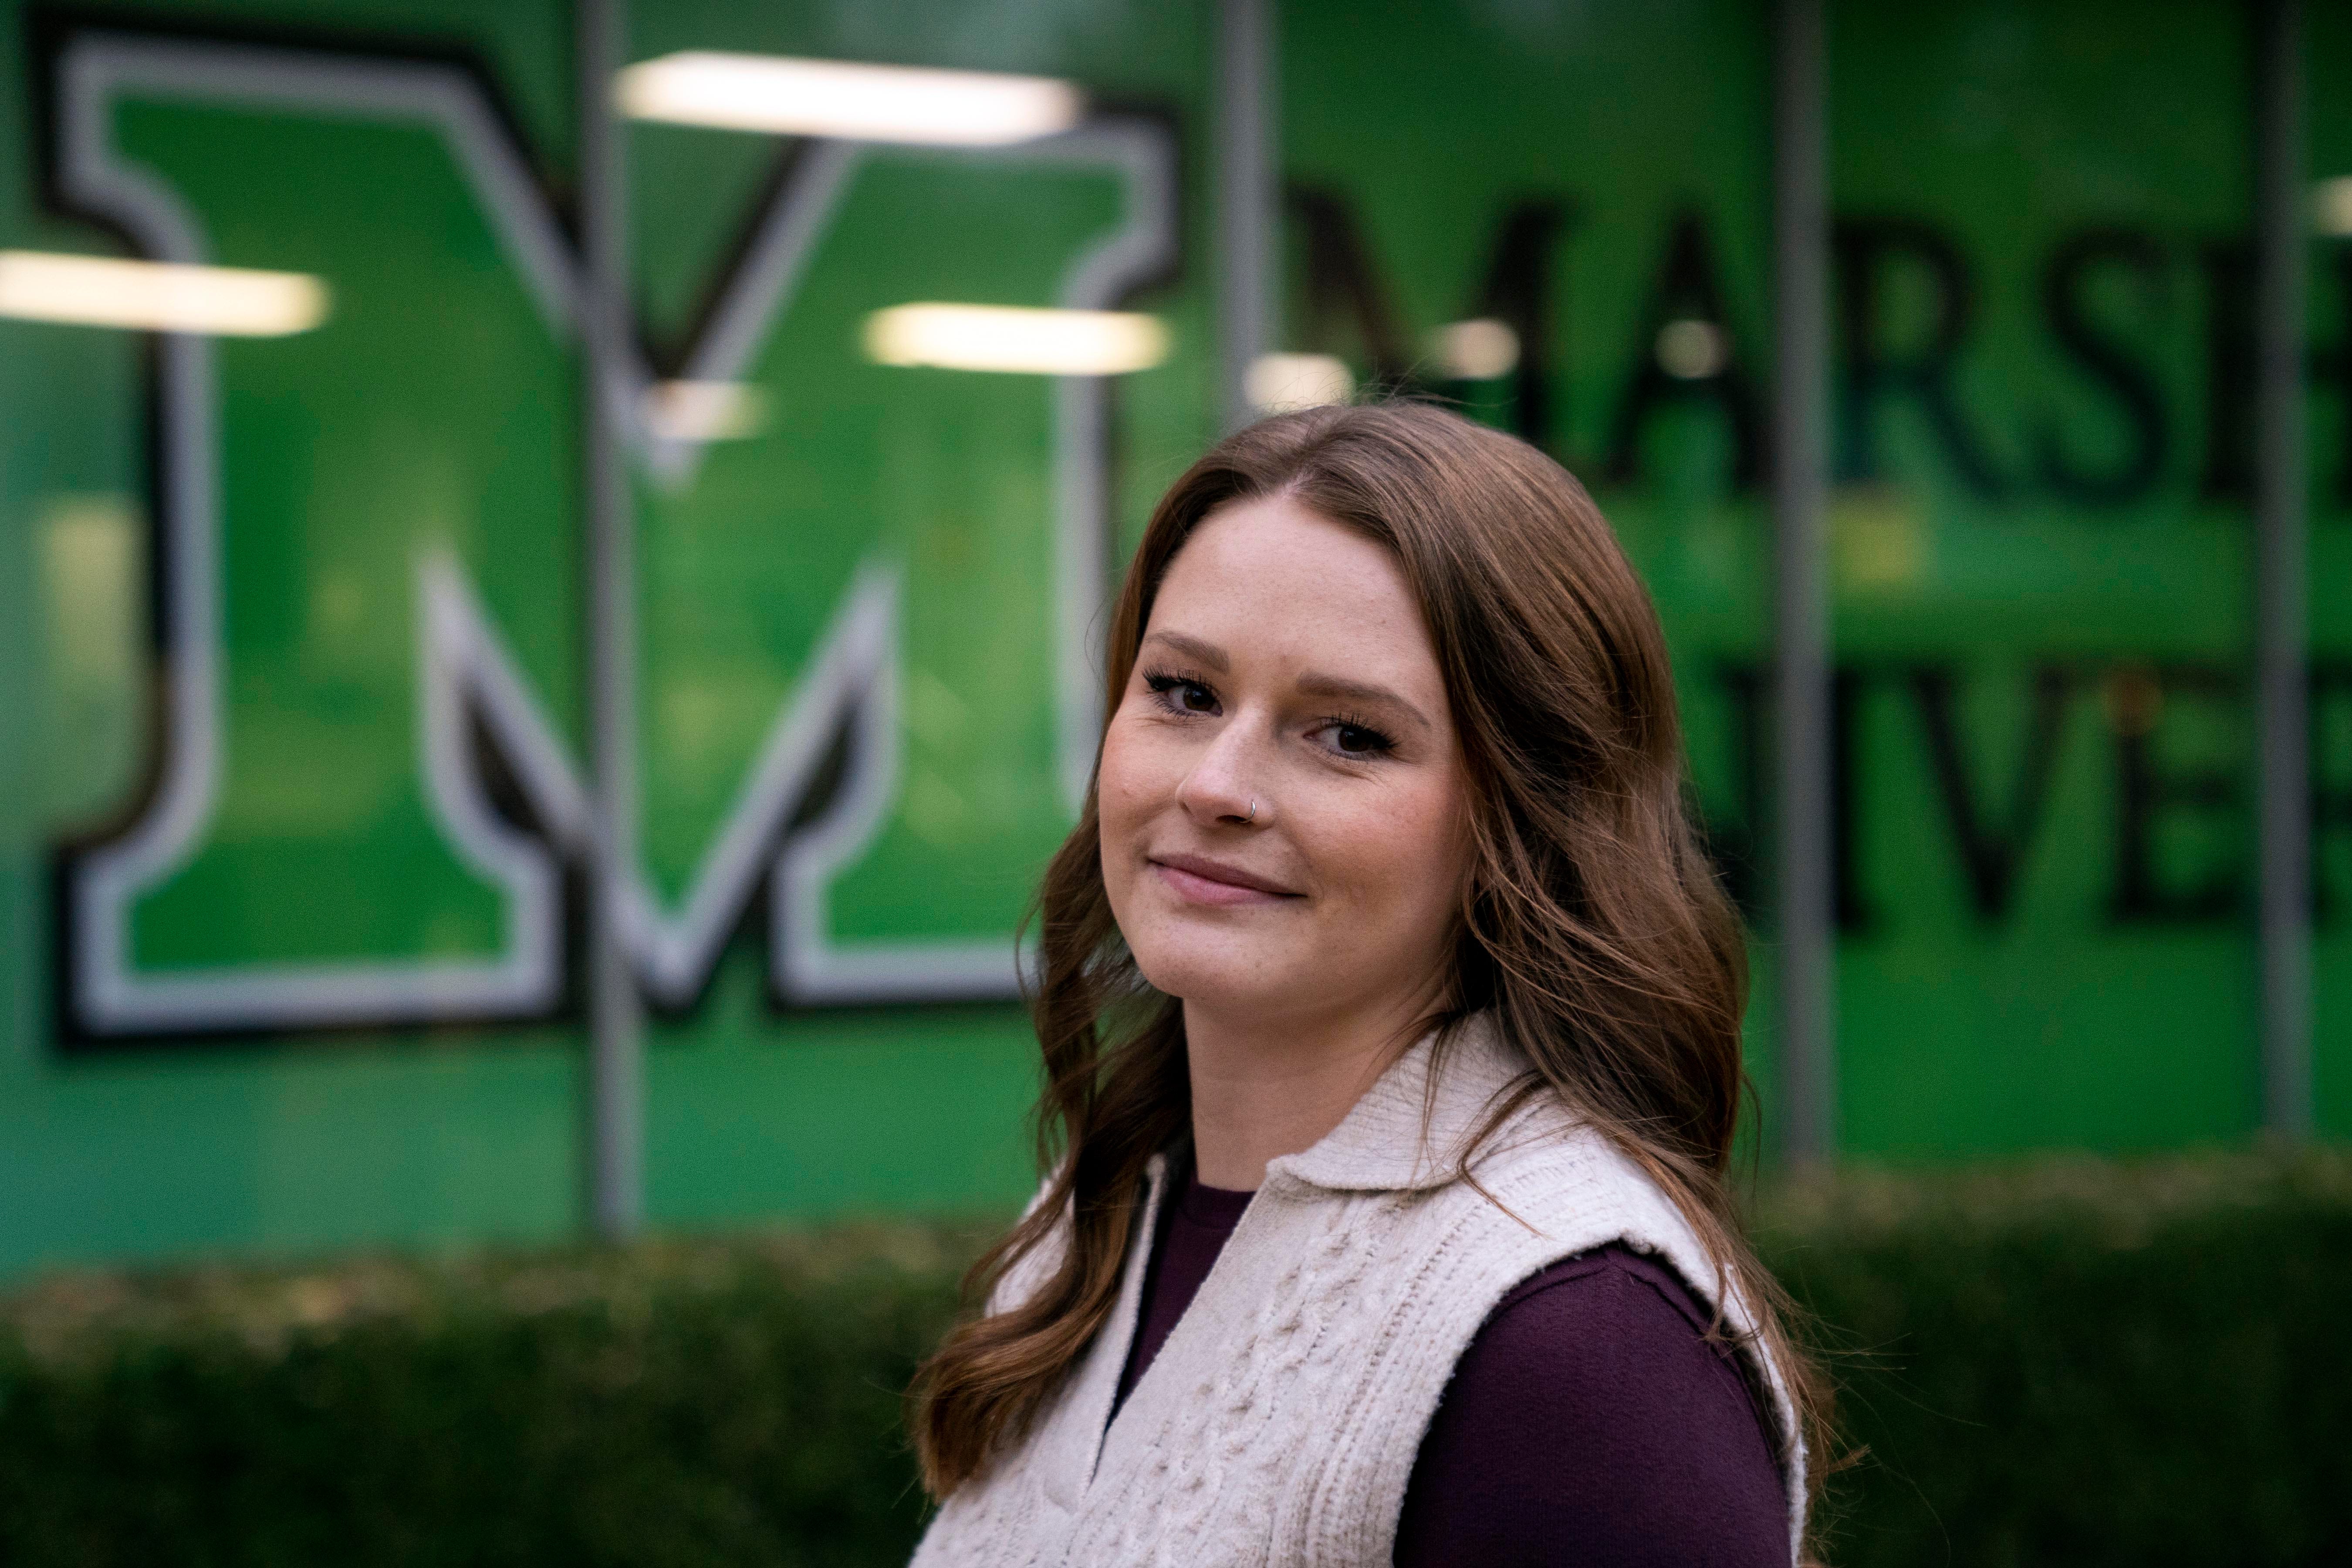 Ripley Haney poses for a portrait at Marshall University on October 20, 2022.